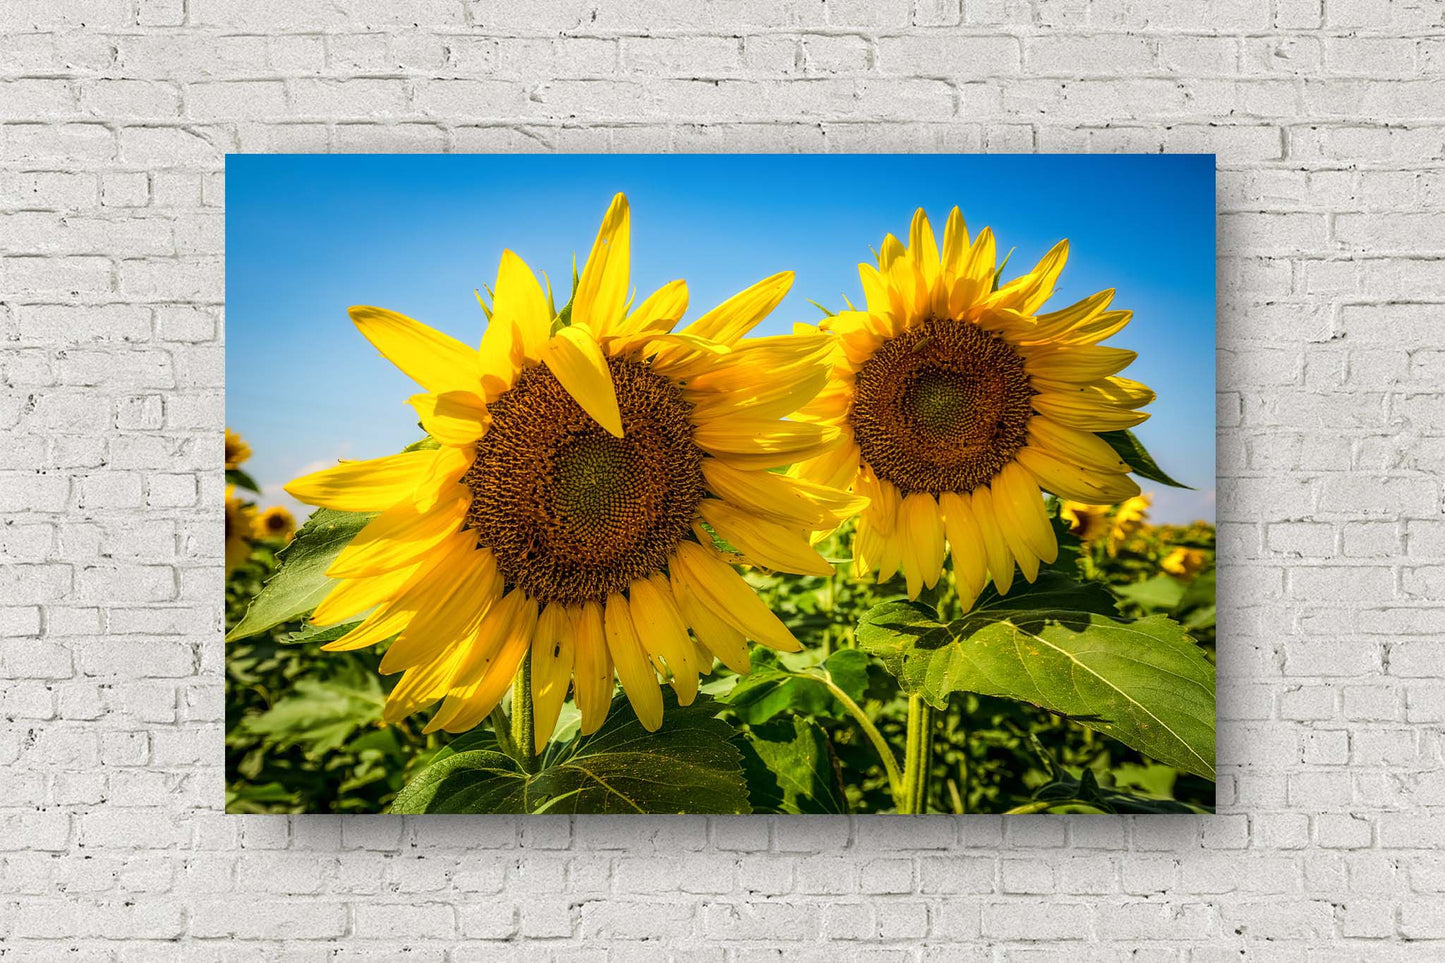 Botanical metal print wall art of a pair of sunflowers shining against a blue sky in a sunflower field on an early autumn day in Kansas by Sean Ramsey of Southern Plains Photography.